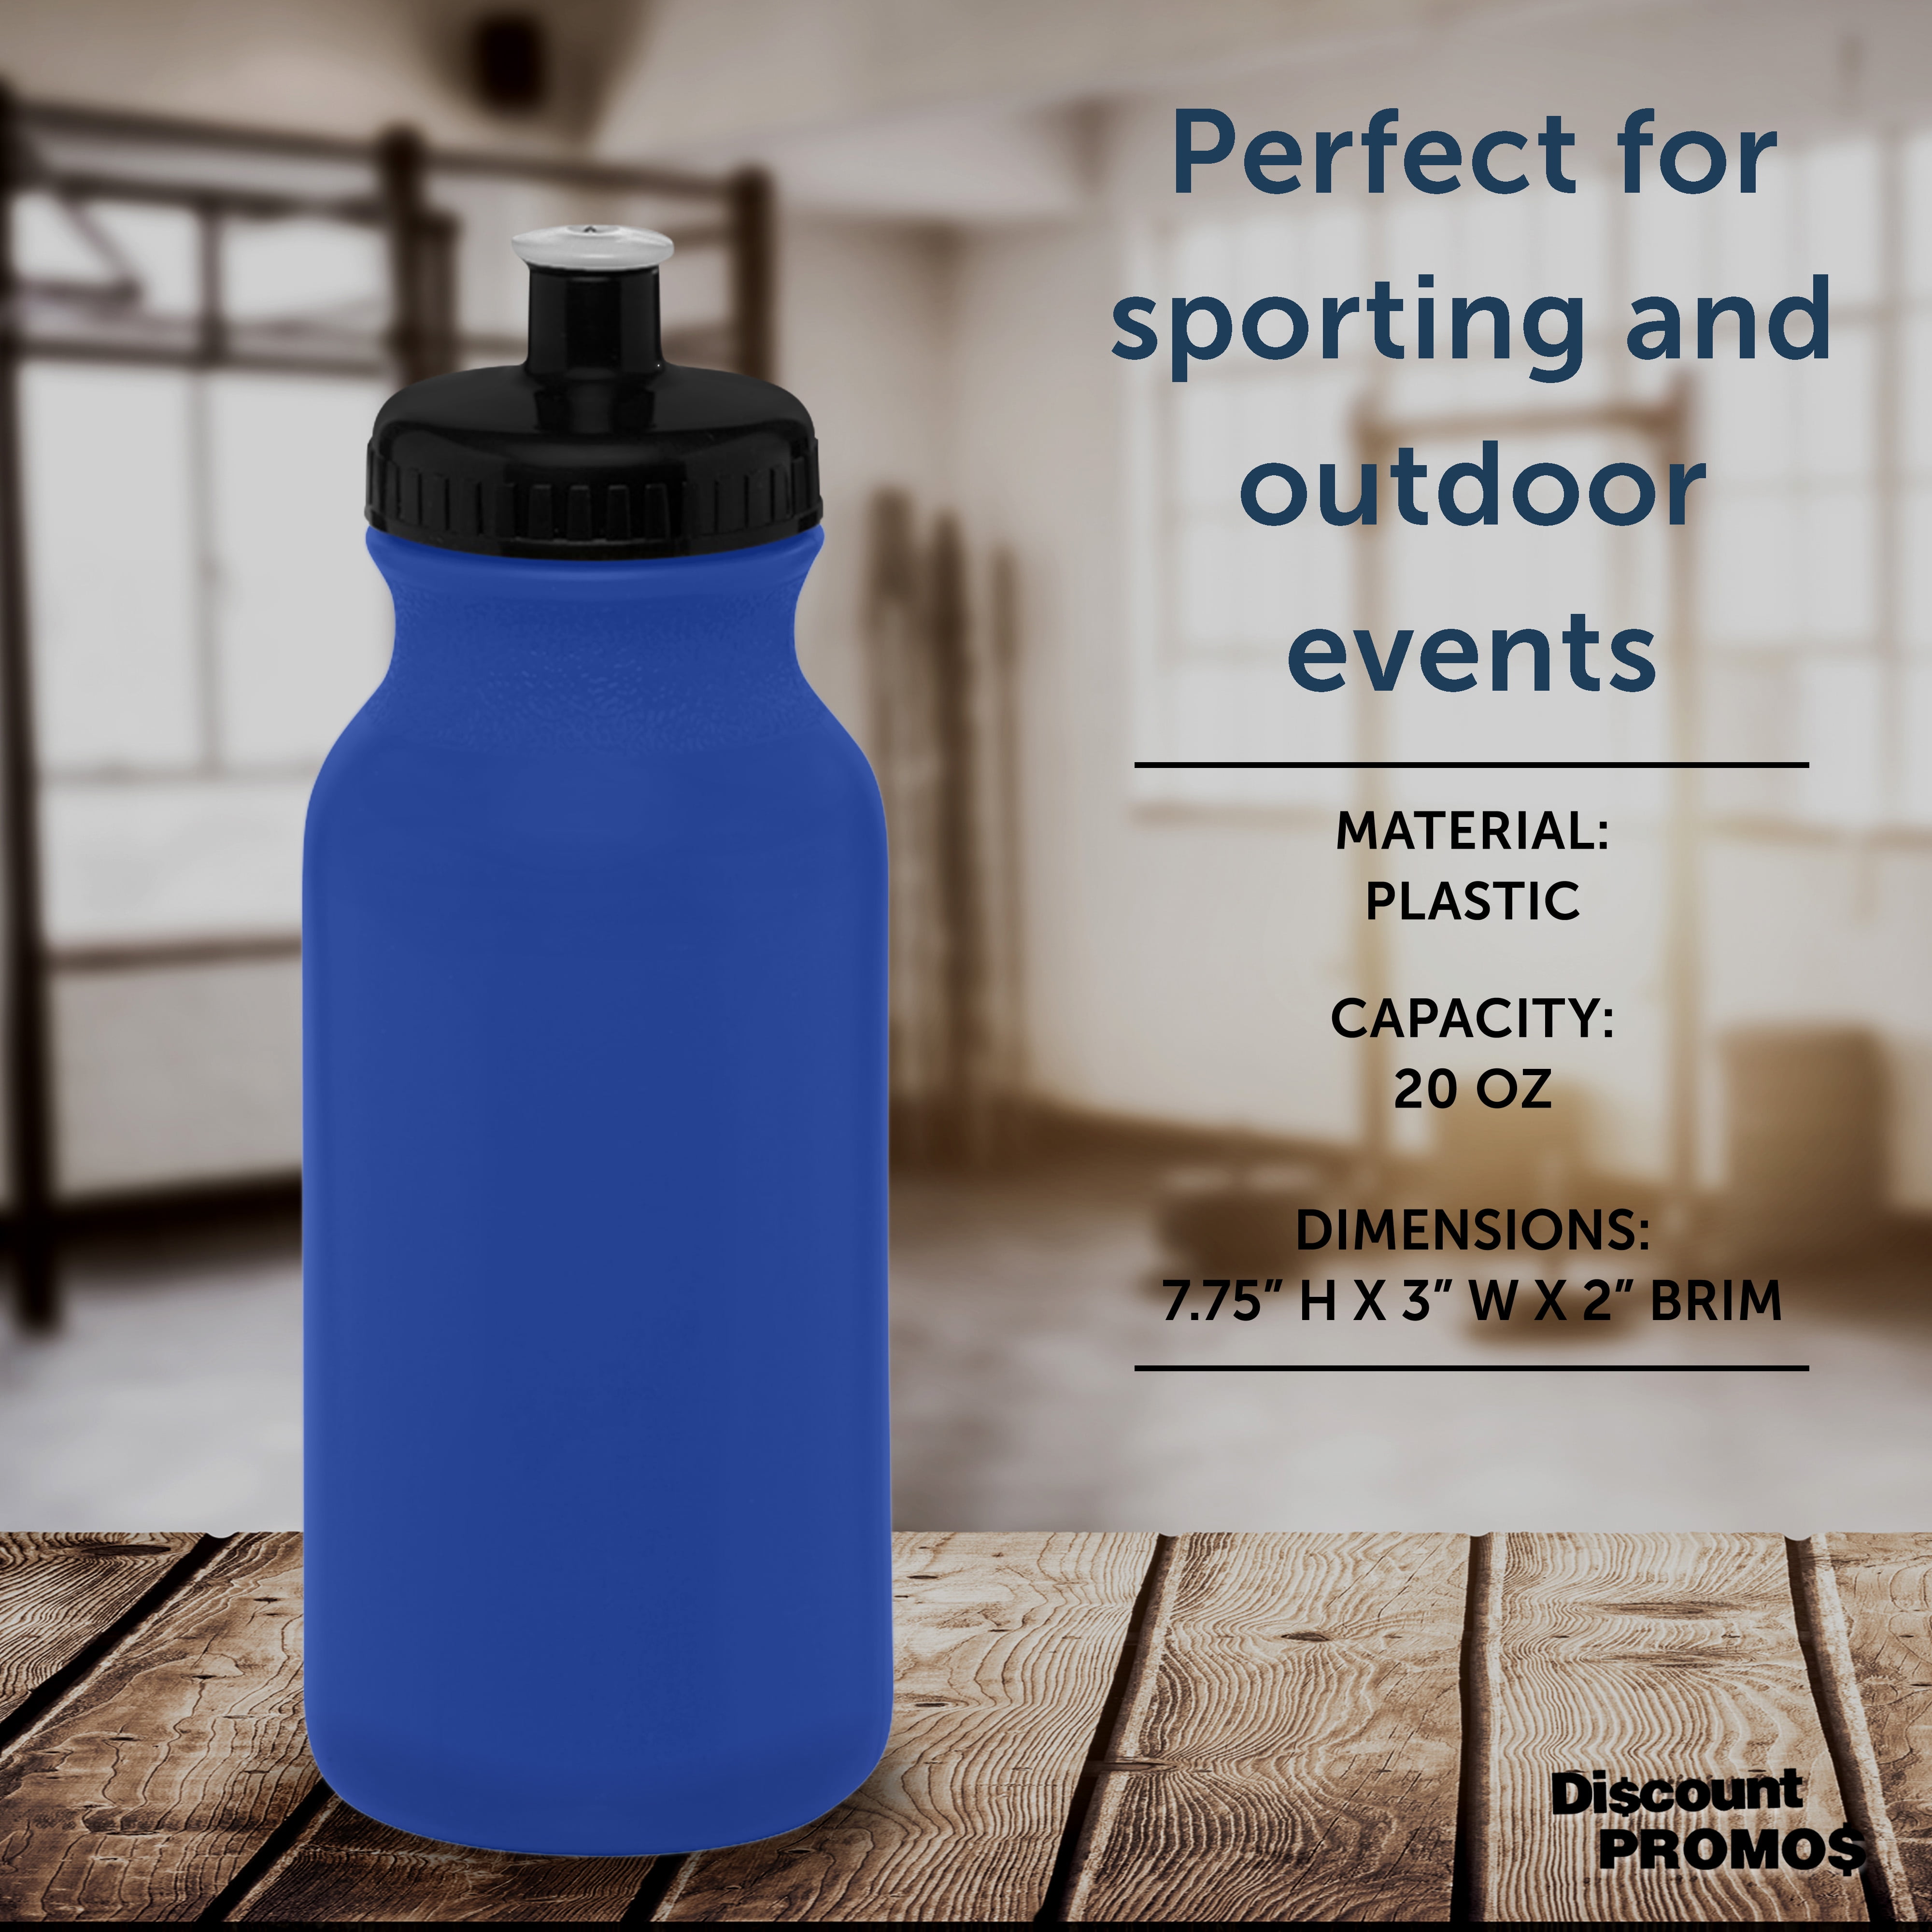 Fun Express Bulk Water Bottles - Set of 60, each holds 18-20 oz - For Kids,  Sports, Handouts and Party Supplies